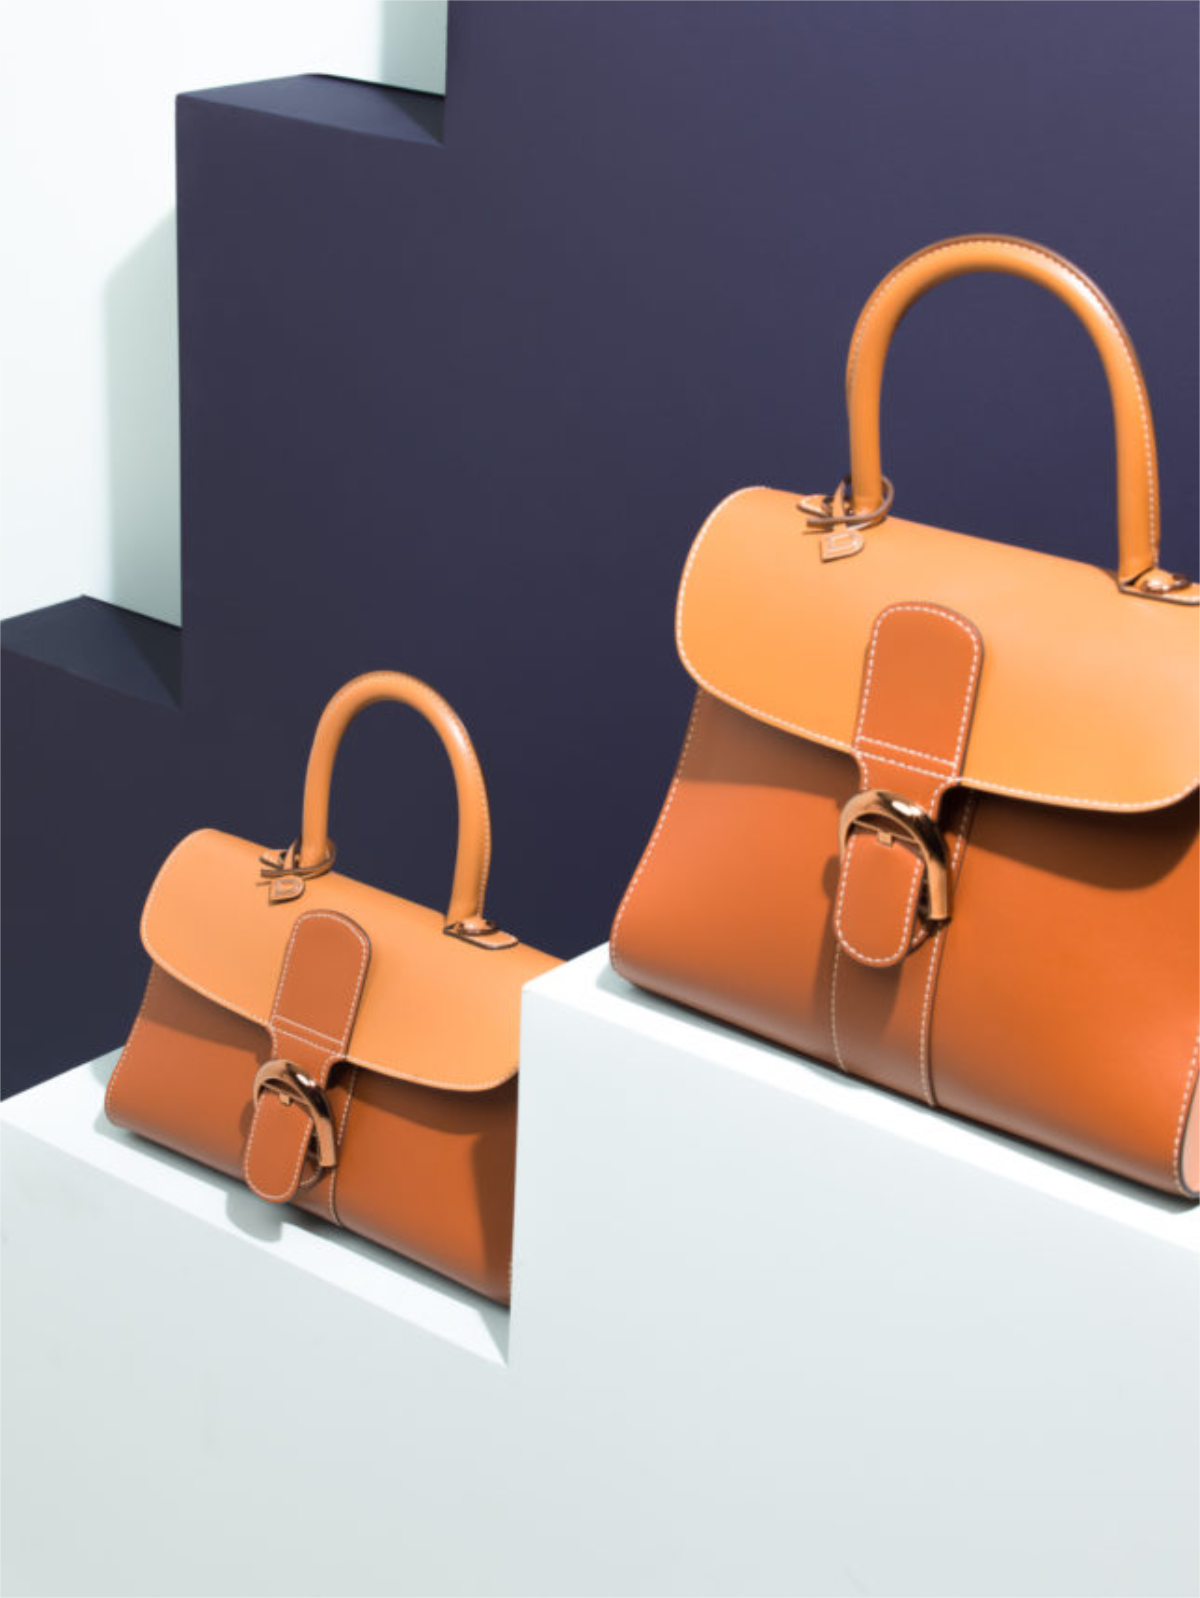 Delvaux -Delvaux -Delvaux -Delvaux -Delvaux -The Oldest Fine Leather Goods House in the World